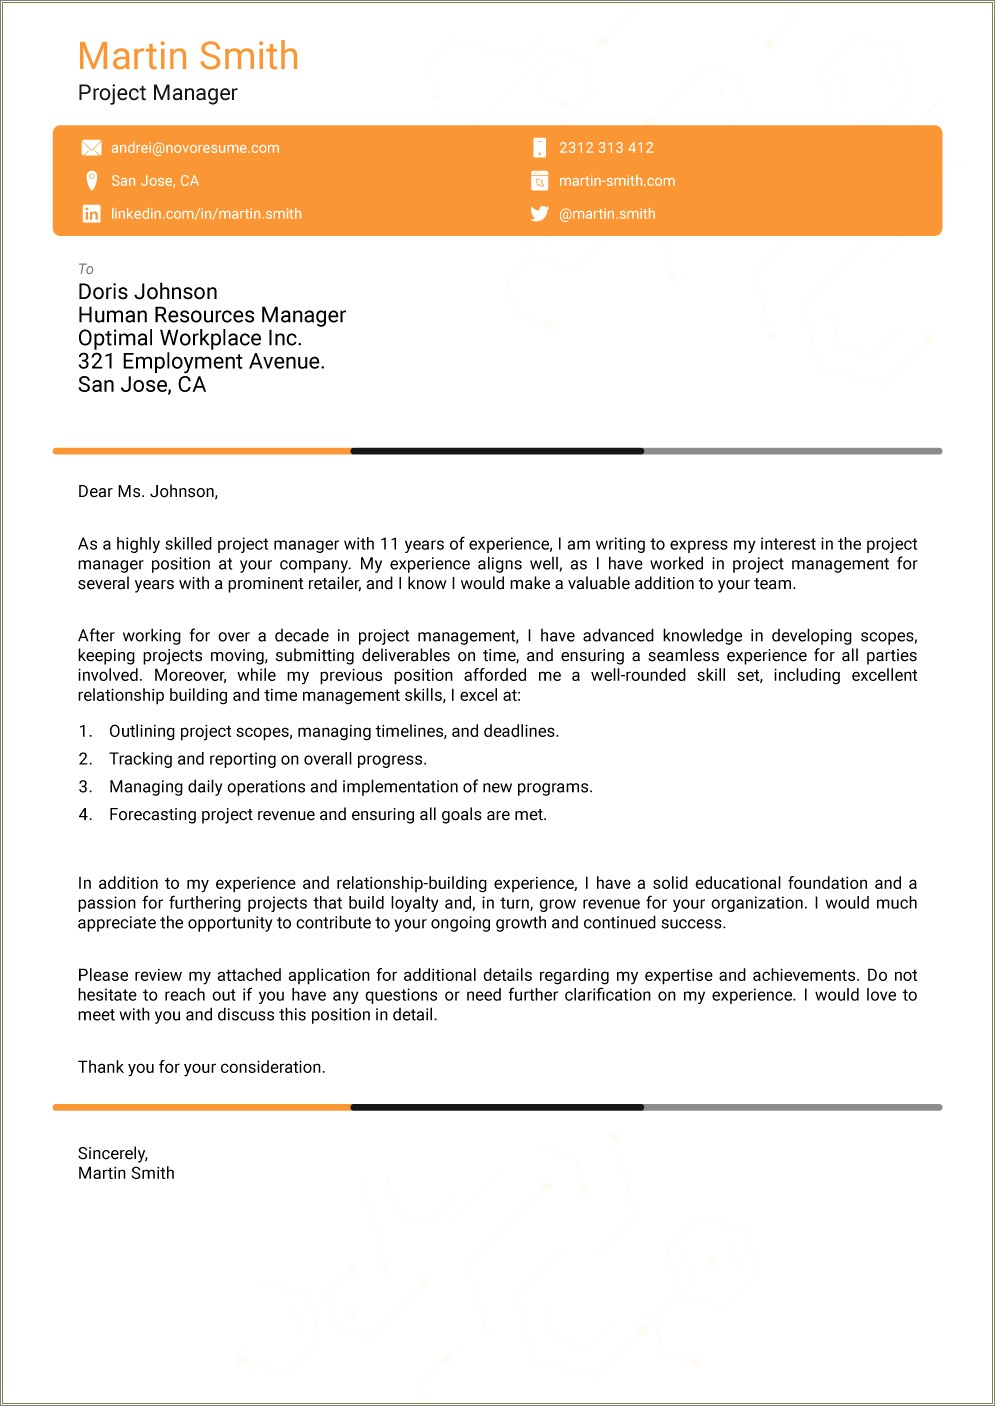 Free Cover Letter Template For Teaching Position